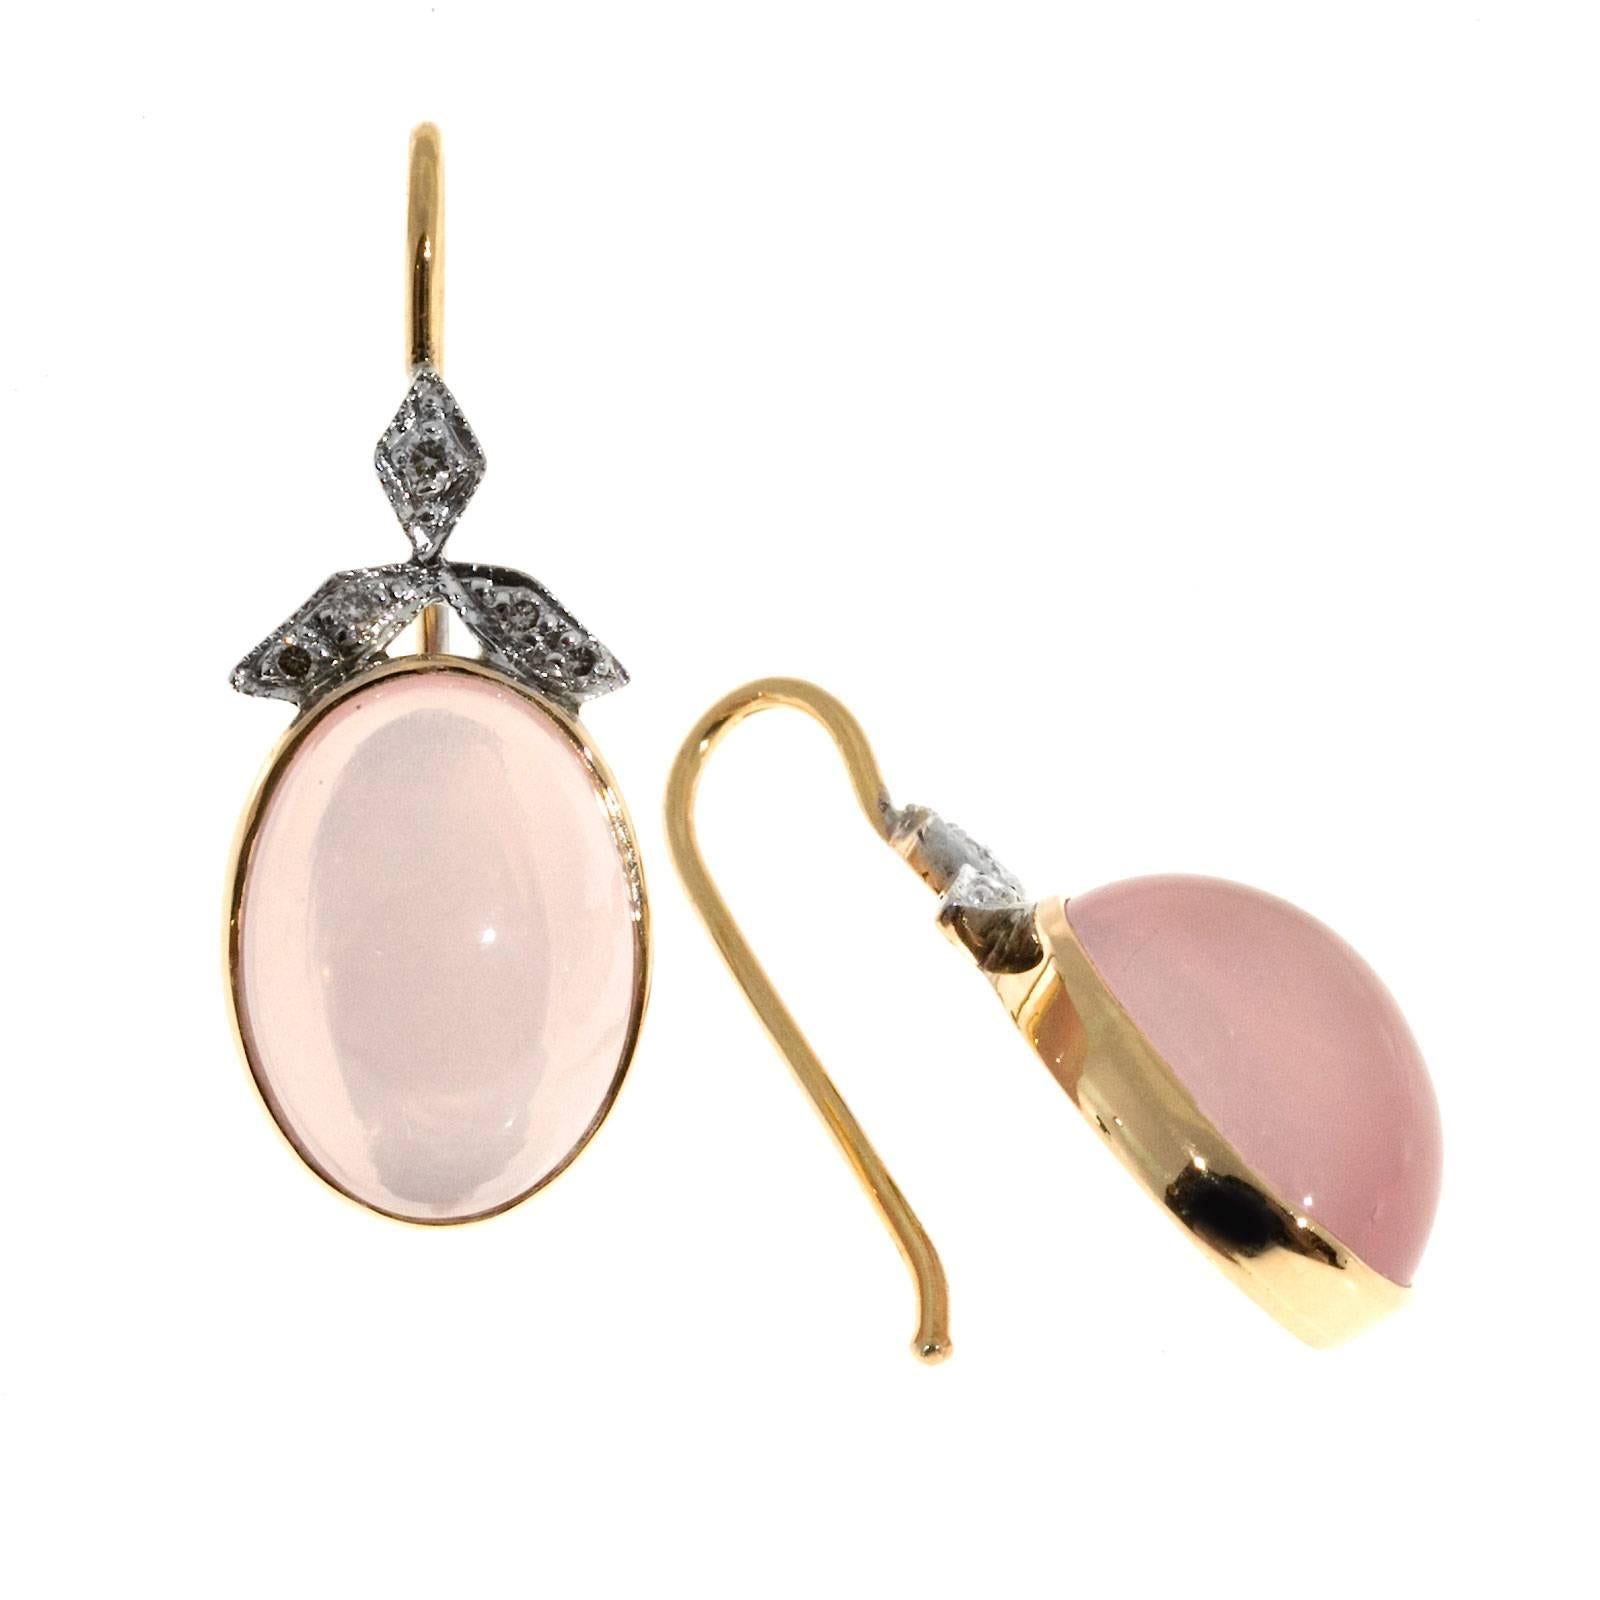 Oval Rose Quartz Cabochon Diamond Danlge Gold Earrings. 14k rose and white gold with simple wire tops. Circa 1940

2 light pink oval cabochon rose Quartz, approx. total weight 10.00cts, VVS, 14 x 10mm
10 full cut diamonds, approx. total weight